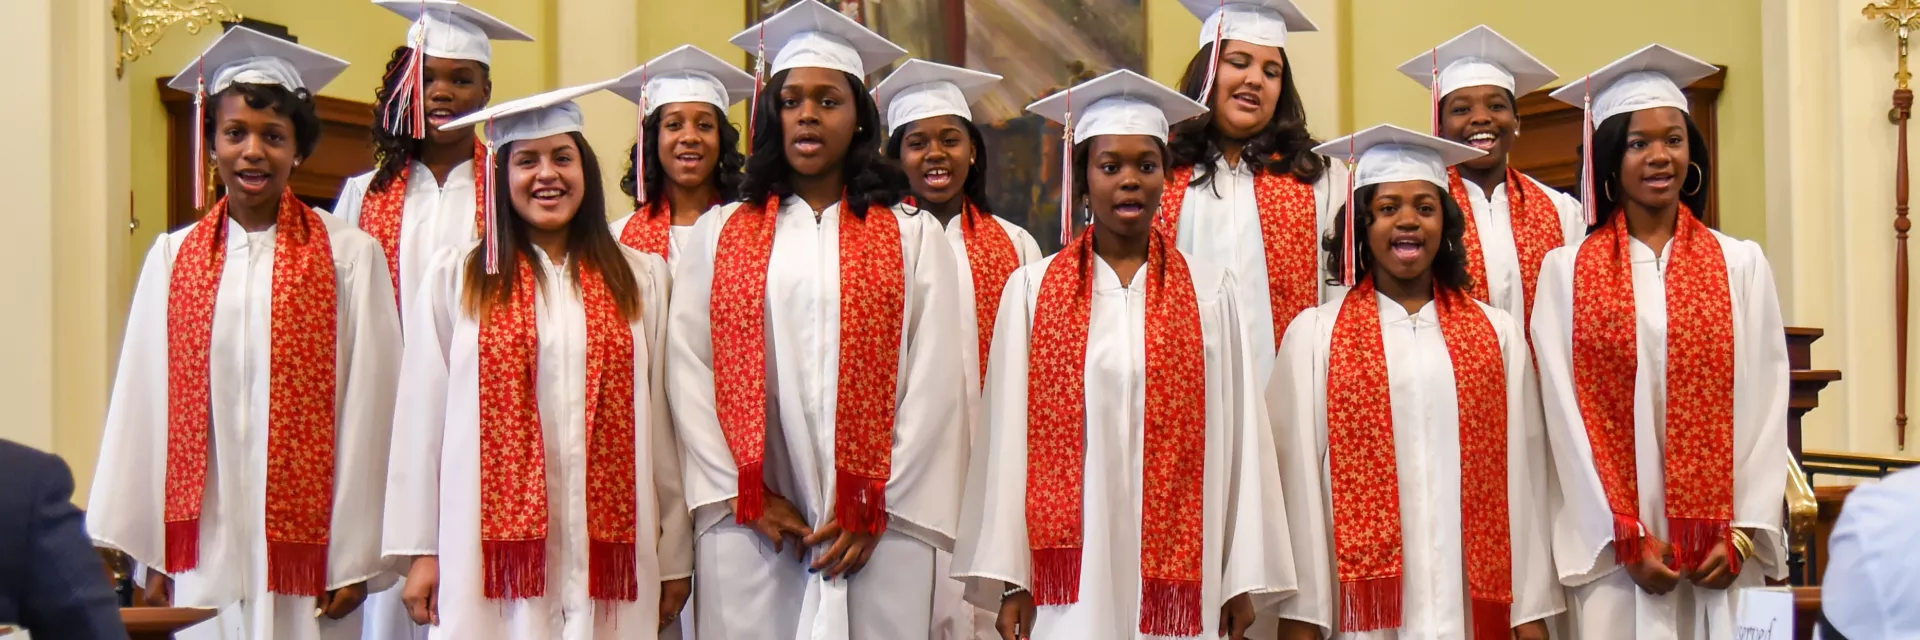 Sisters Academy of Baltimore graduation